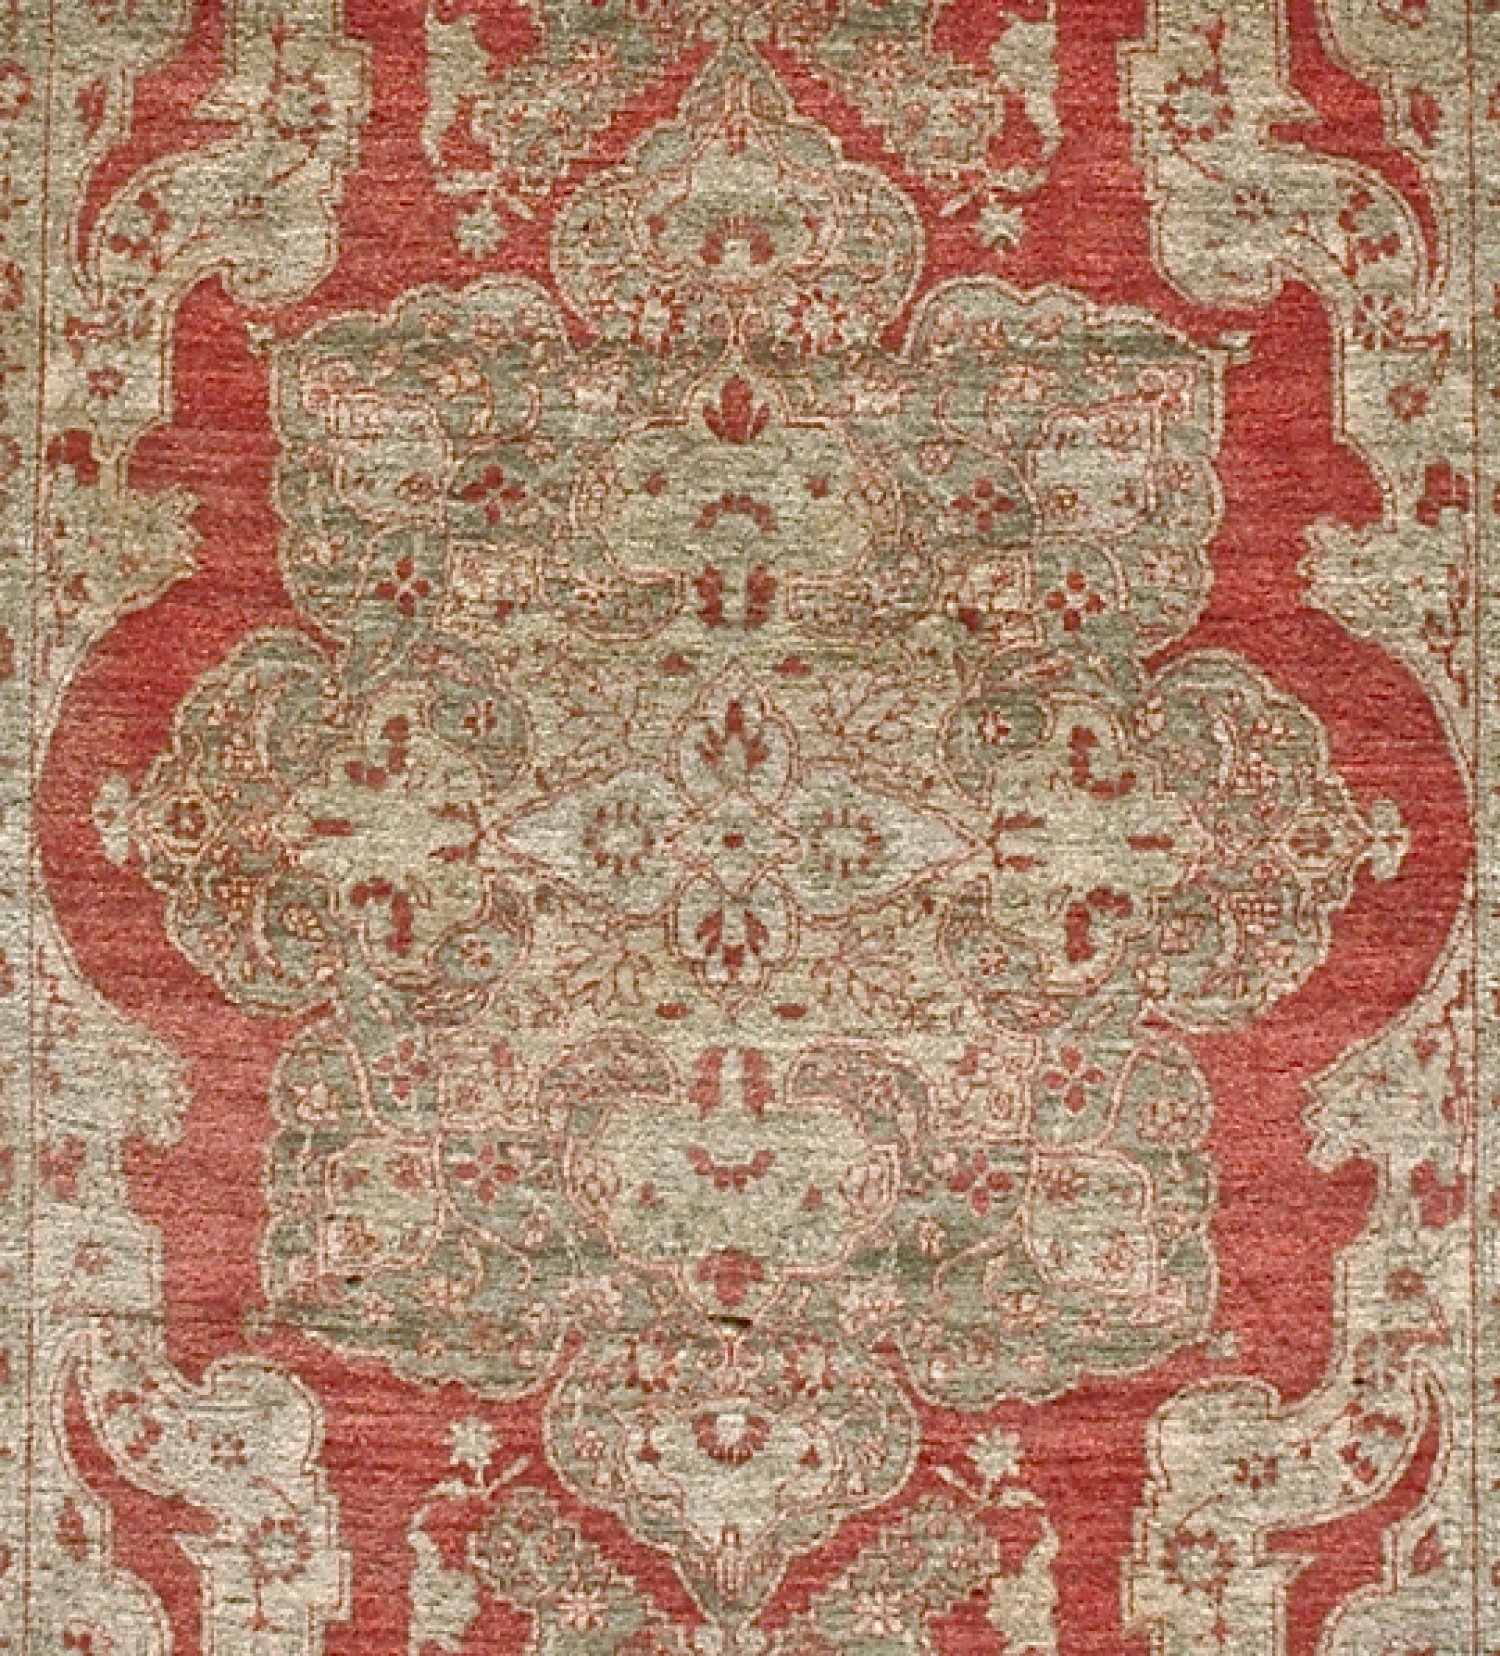 Tabriz rug from northern Persia,